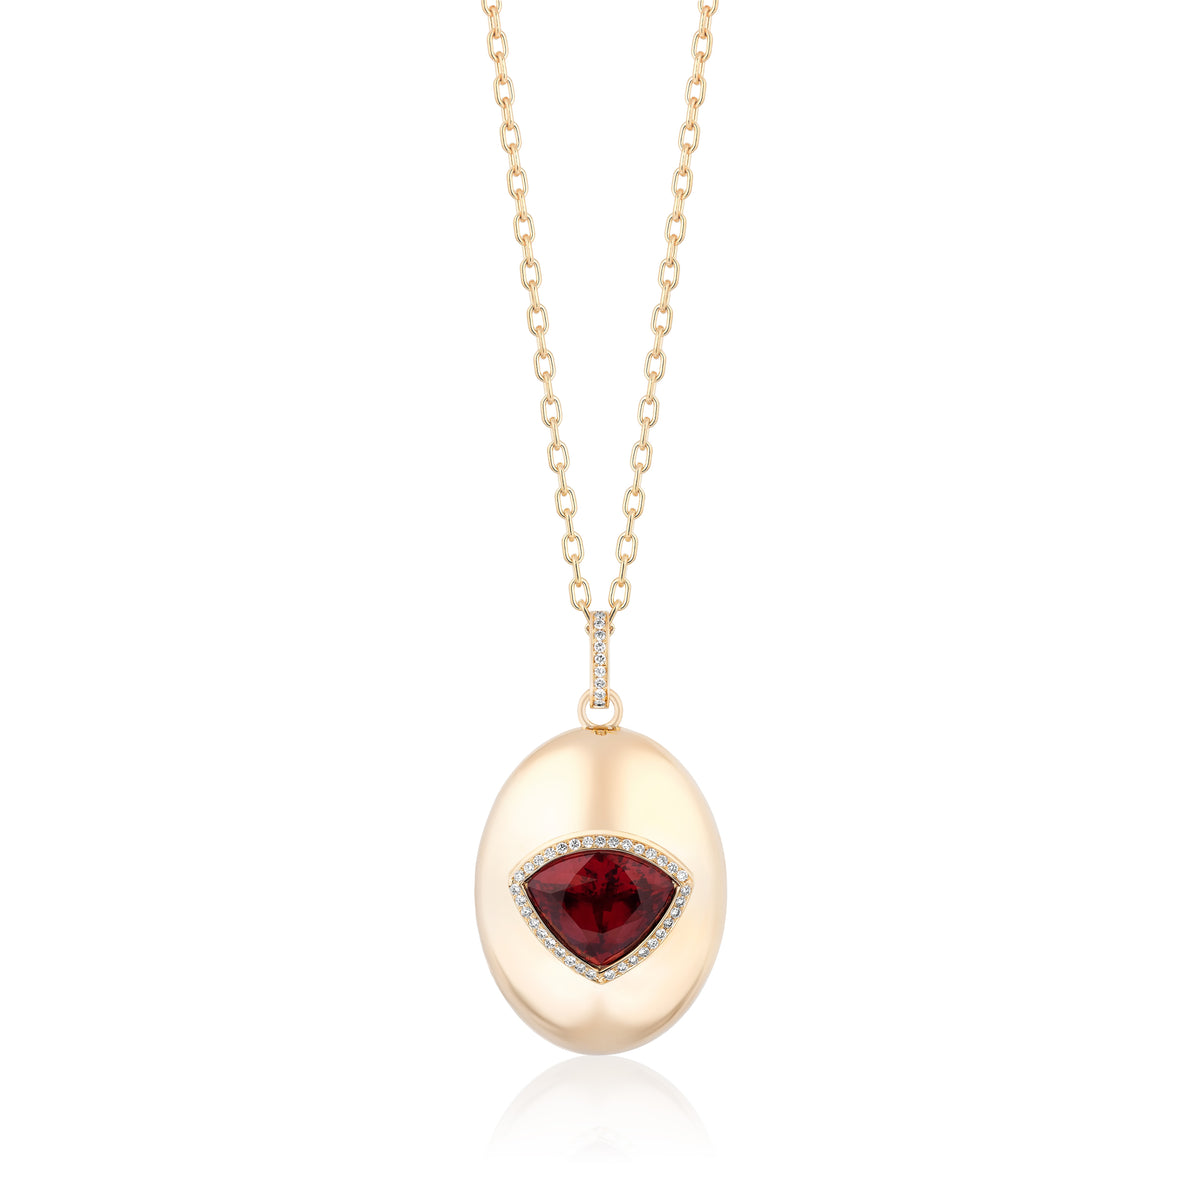 Burnished Pavé Trillion Cut Ruby Charm Pendant in Yellow Gold